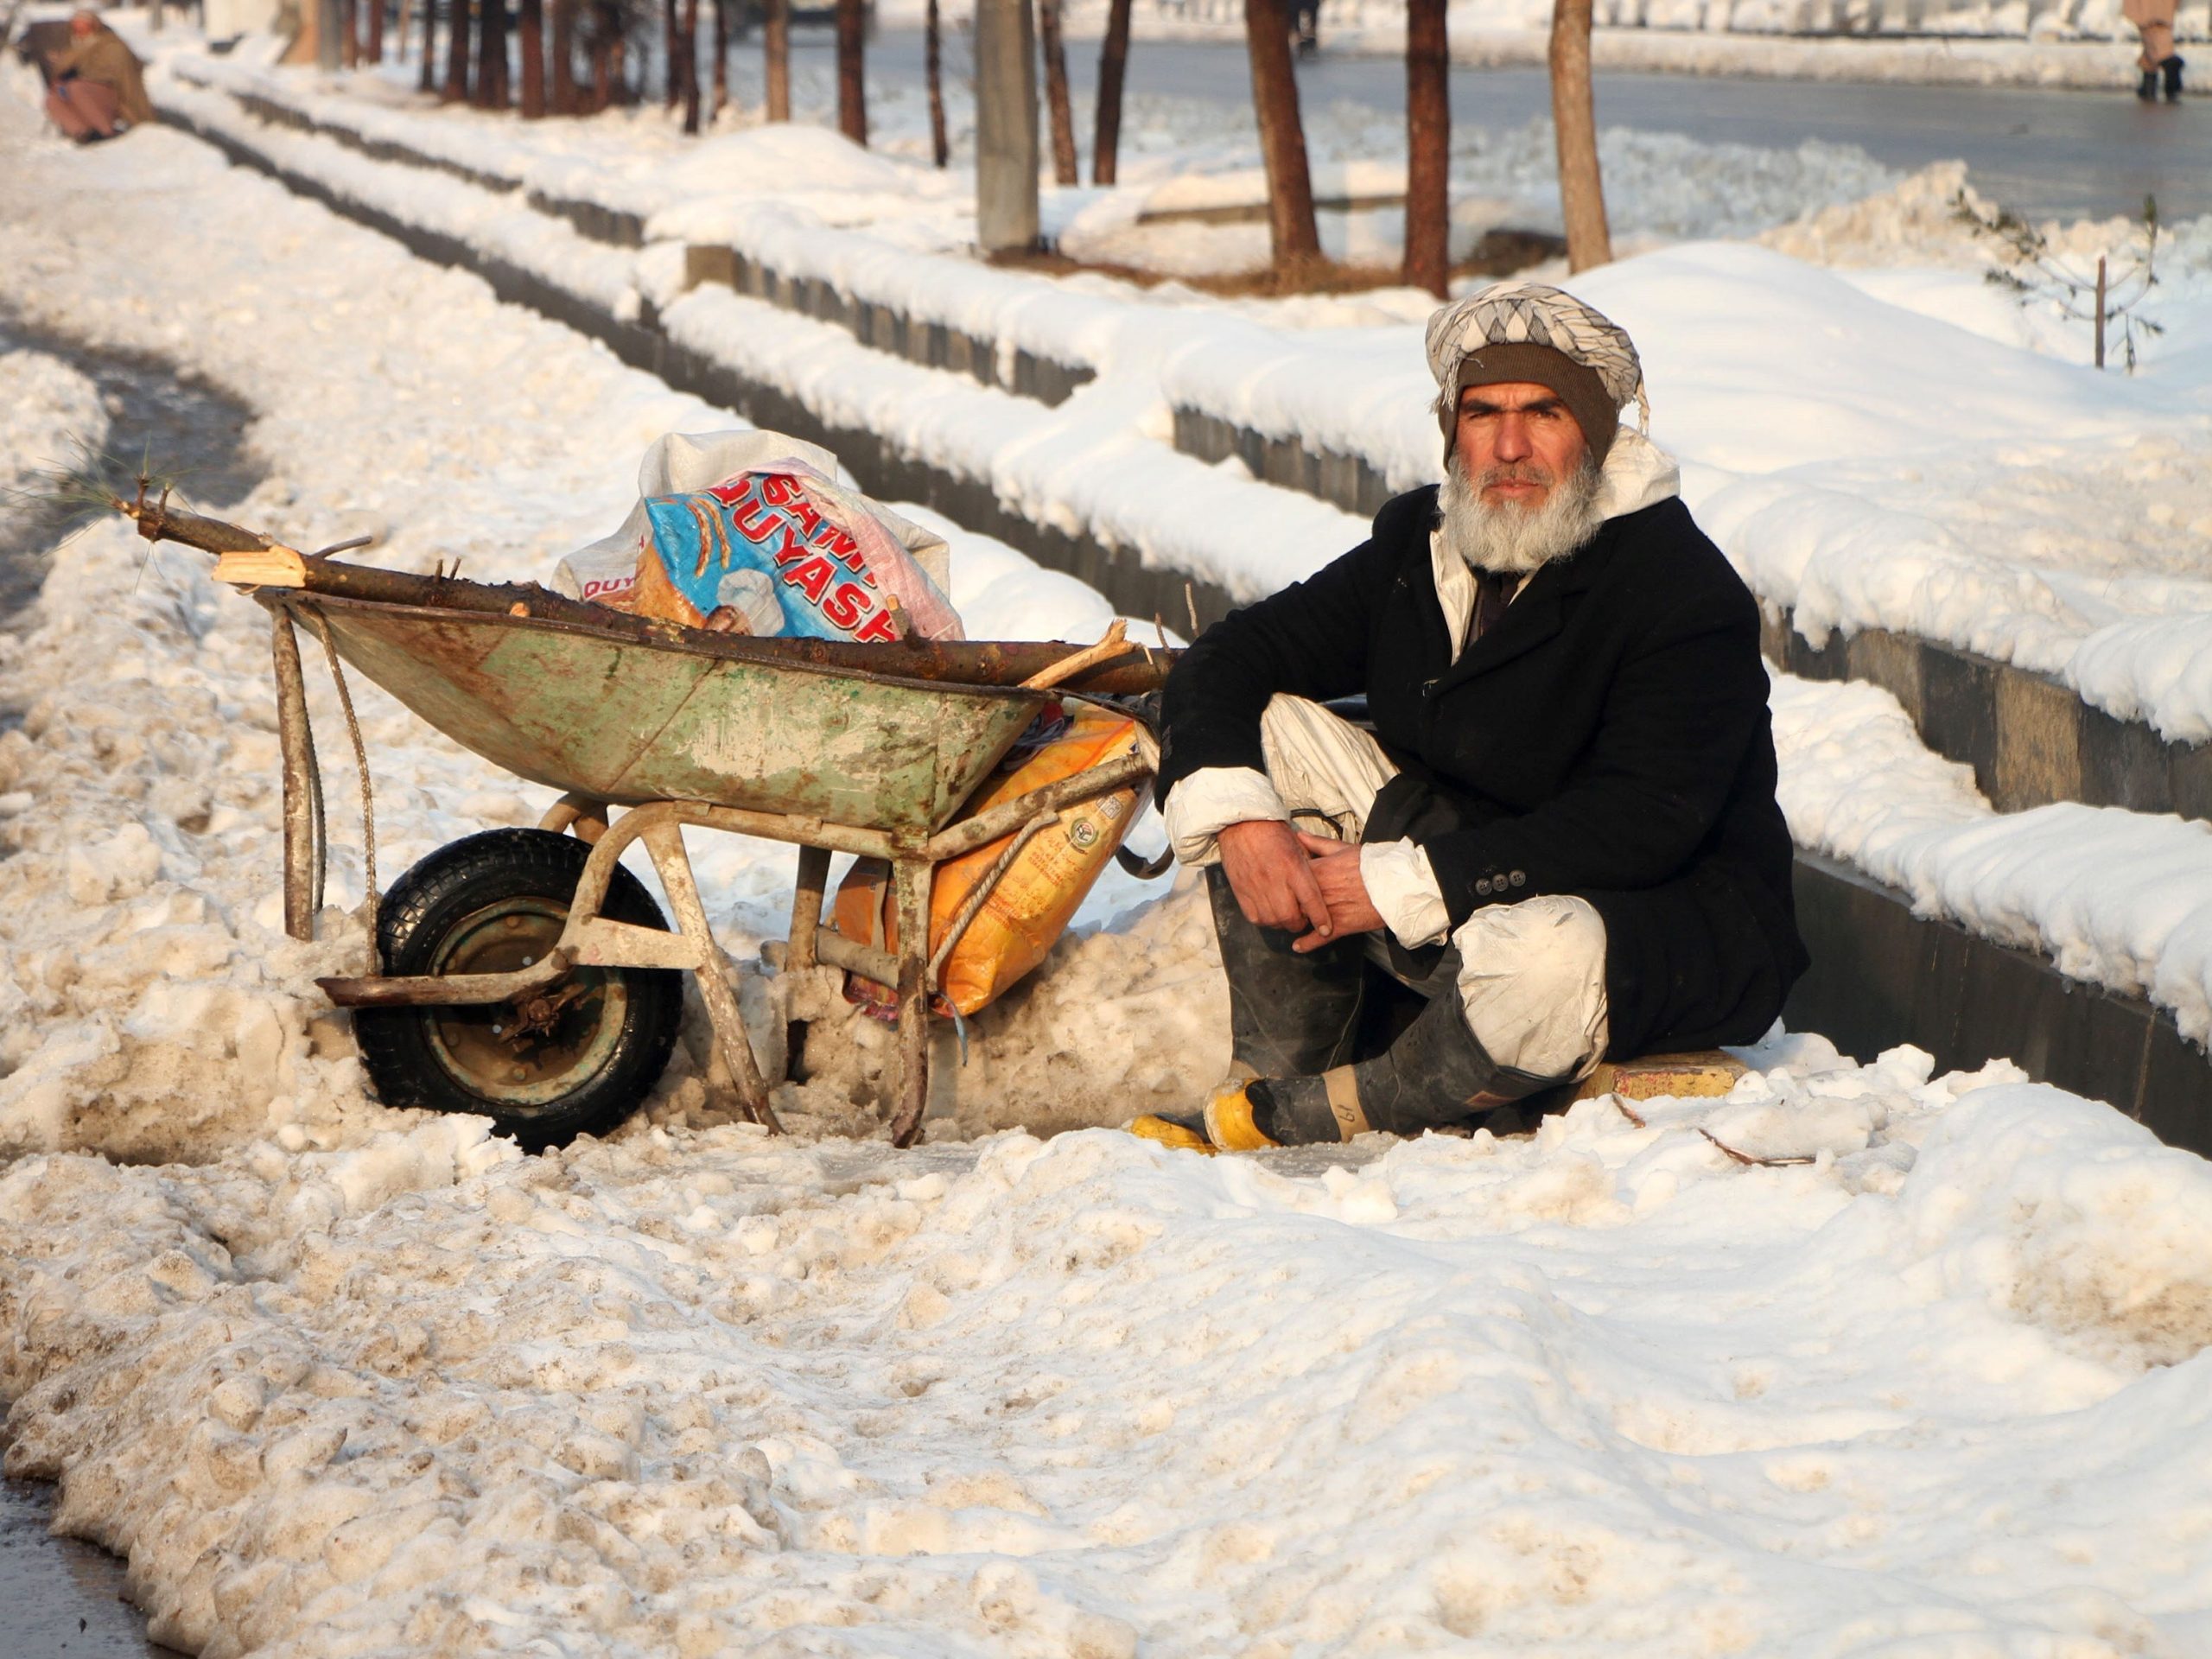 Afghan man sits in the snow as he waits for work.